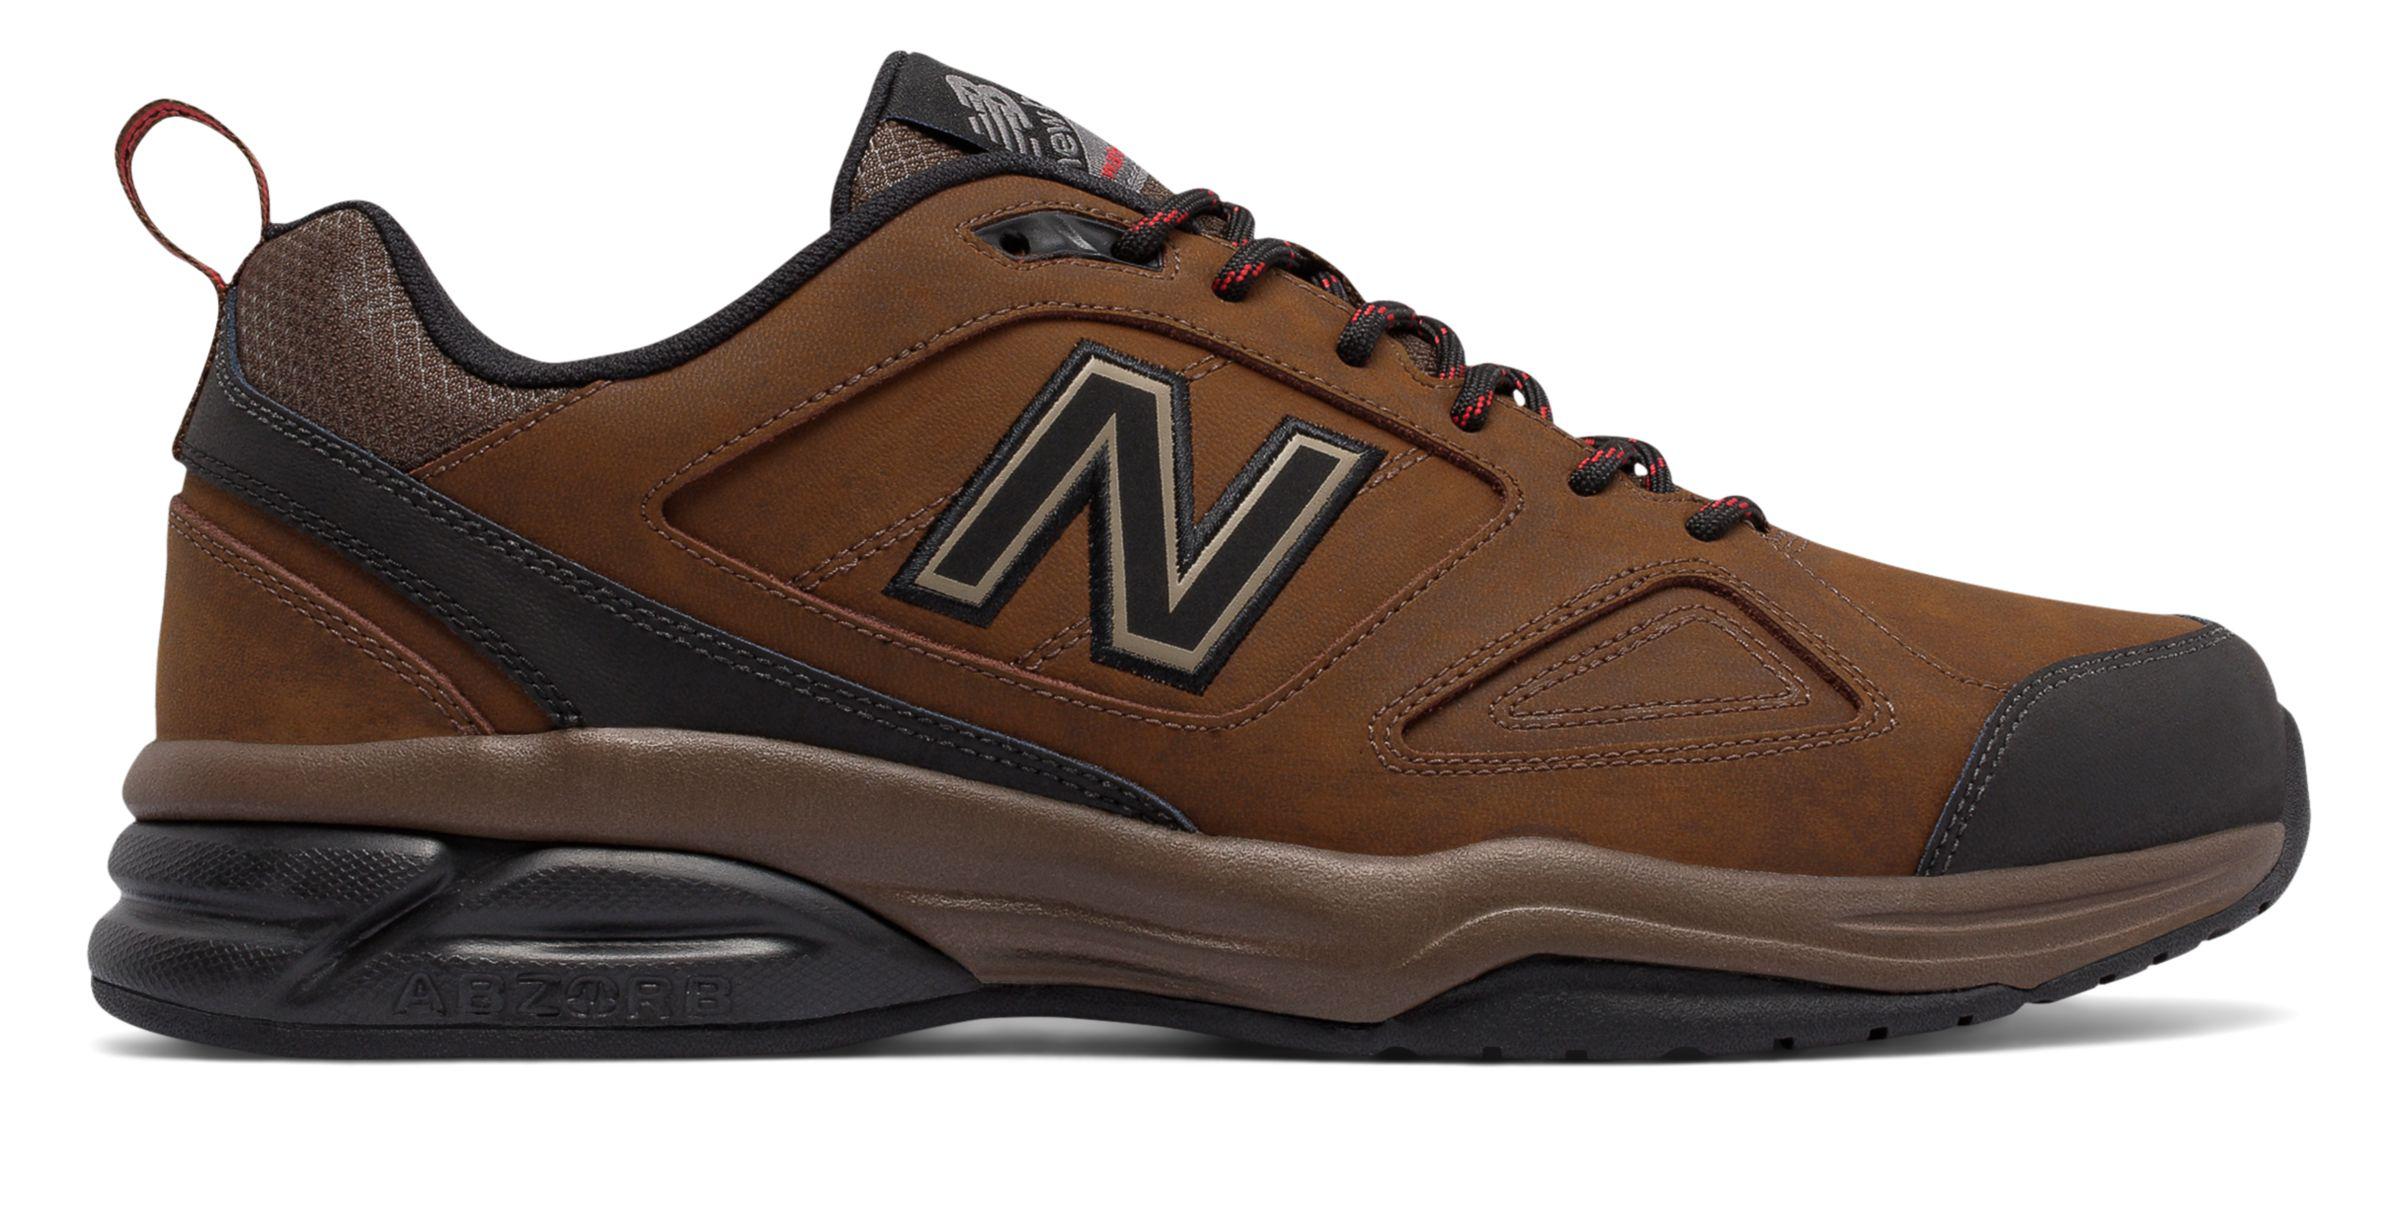 New Balance 623v3 Trainer Leather in 